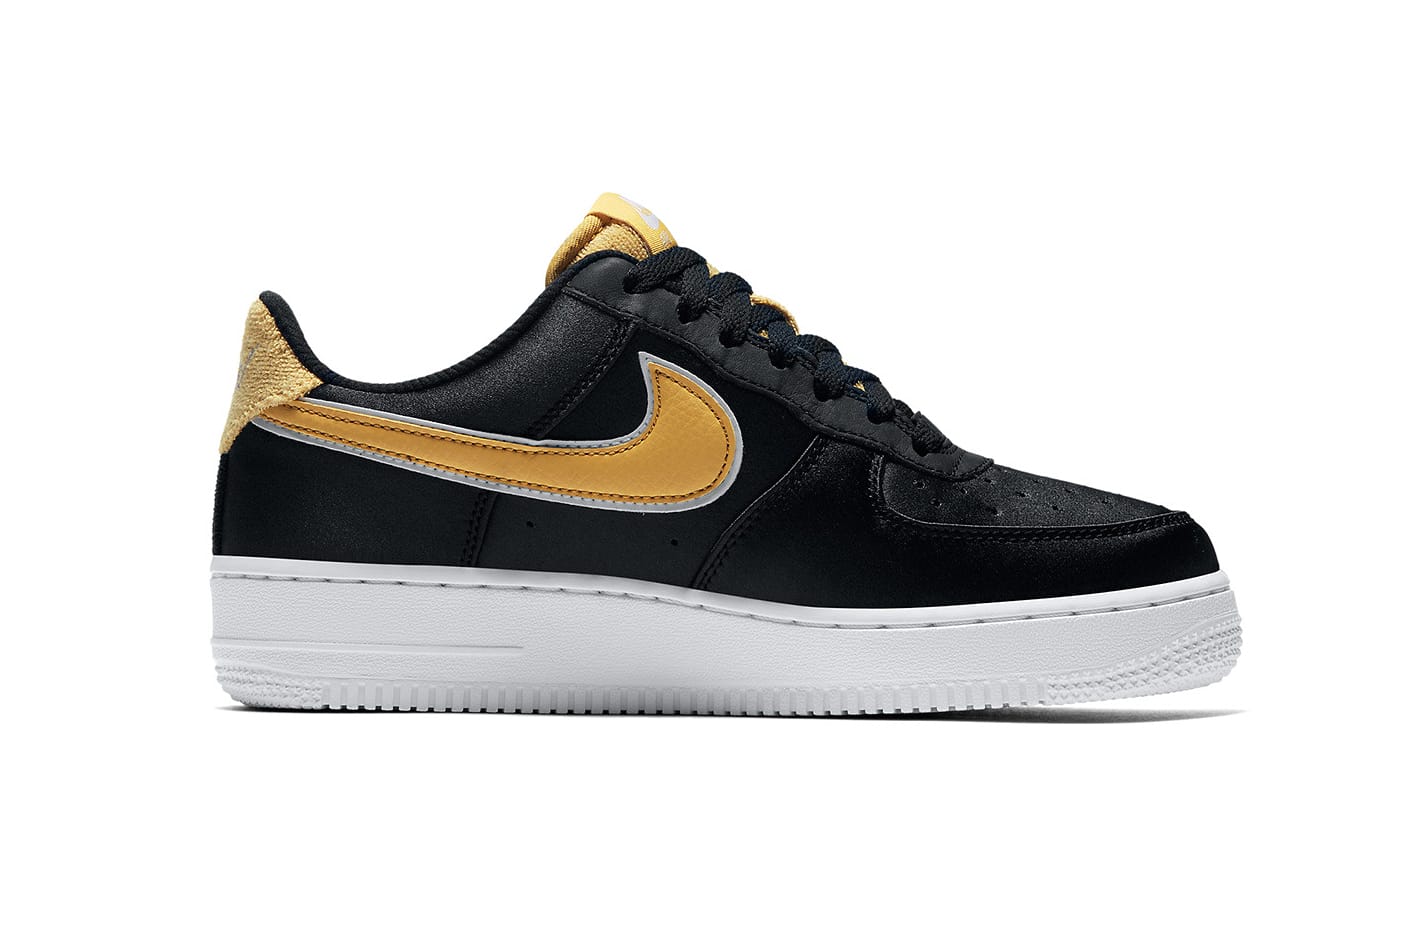 Nike Air Force 1 Low in Satin Black and 